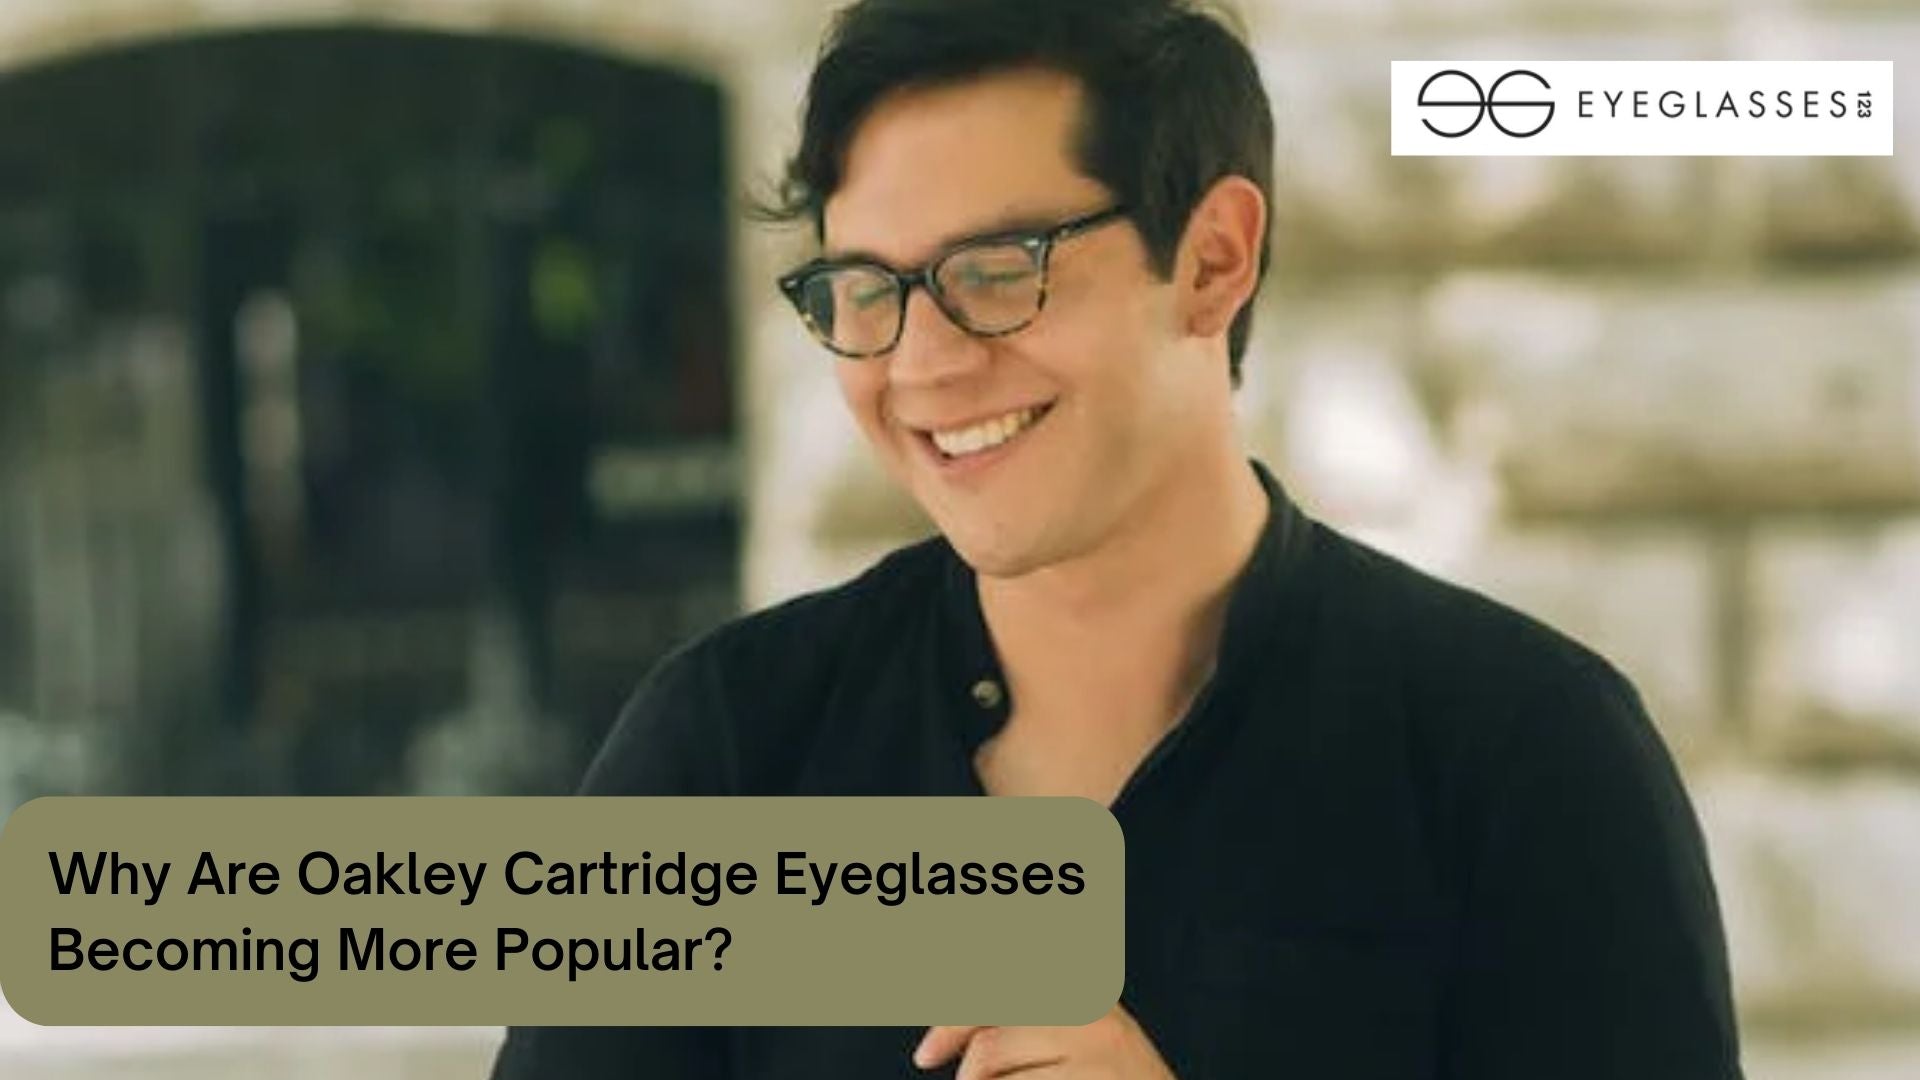 Why Are Oakley Cartridge Eyeglasses Becoming More Popular?